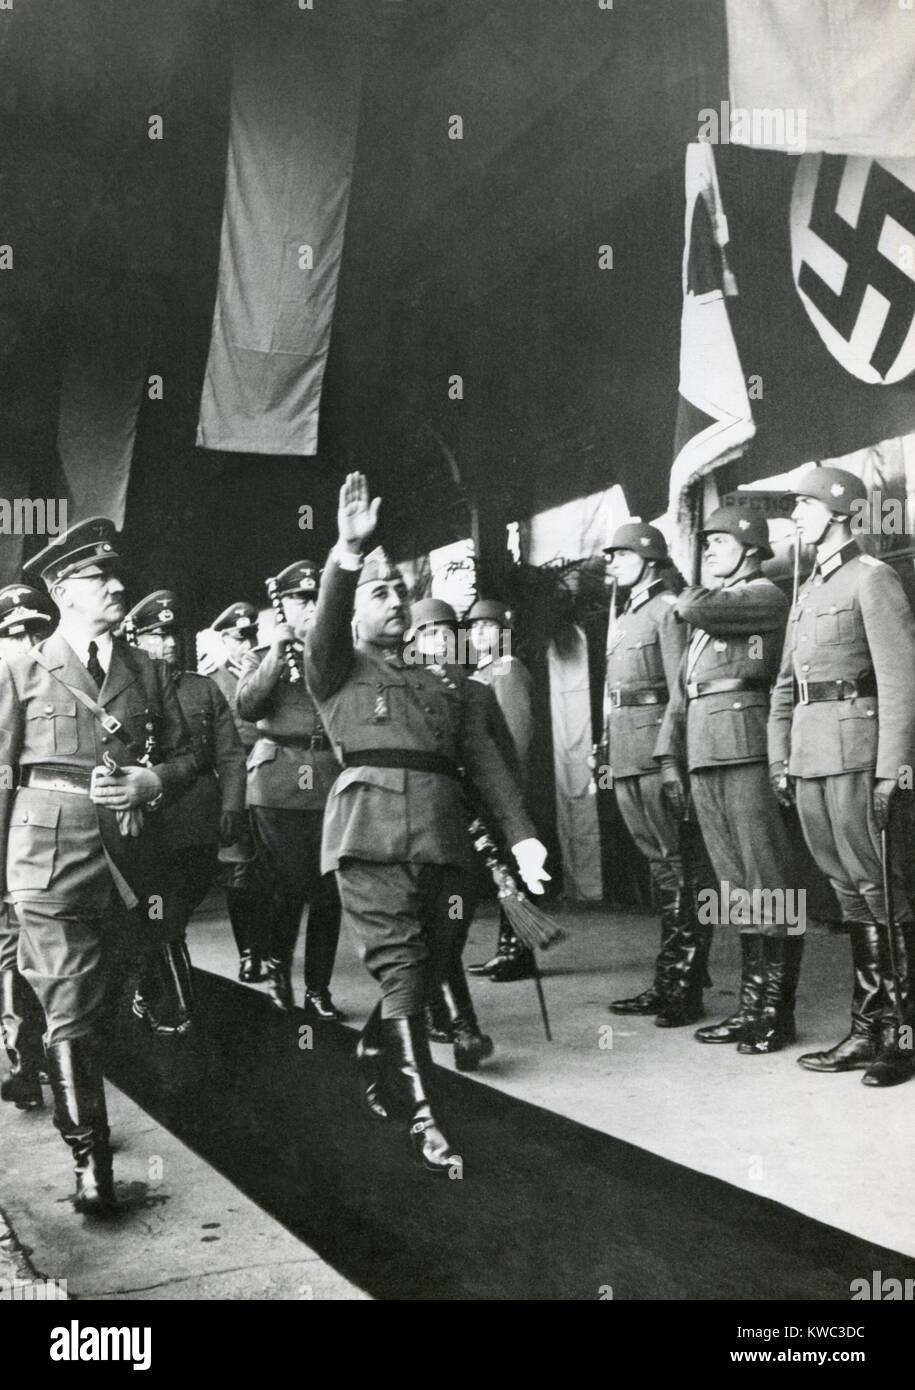 Spanish Fascist dictator Francisco Franco and Adolf Hitler Salute at Hendaye, France. Oct. 23, 1940. Hitler traveled to enlist Italy, Spain and Vichy France to block Mediterranean at Gibraltar to cut Britain's access to North Africa and the Suez Canal. Franco declined and Germany re-directed it's aggression at Russia in 1941. World War 2. (BSLOC 2015 13 56) Stock Photo